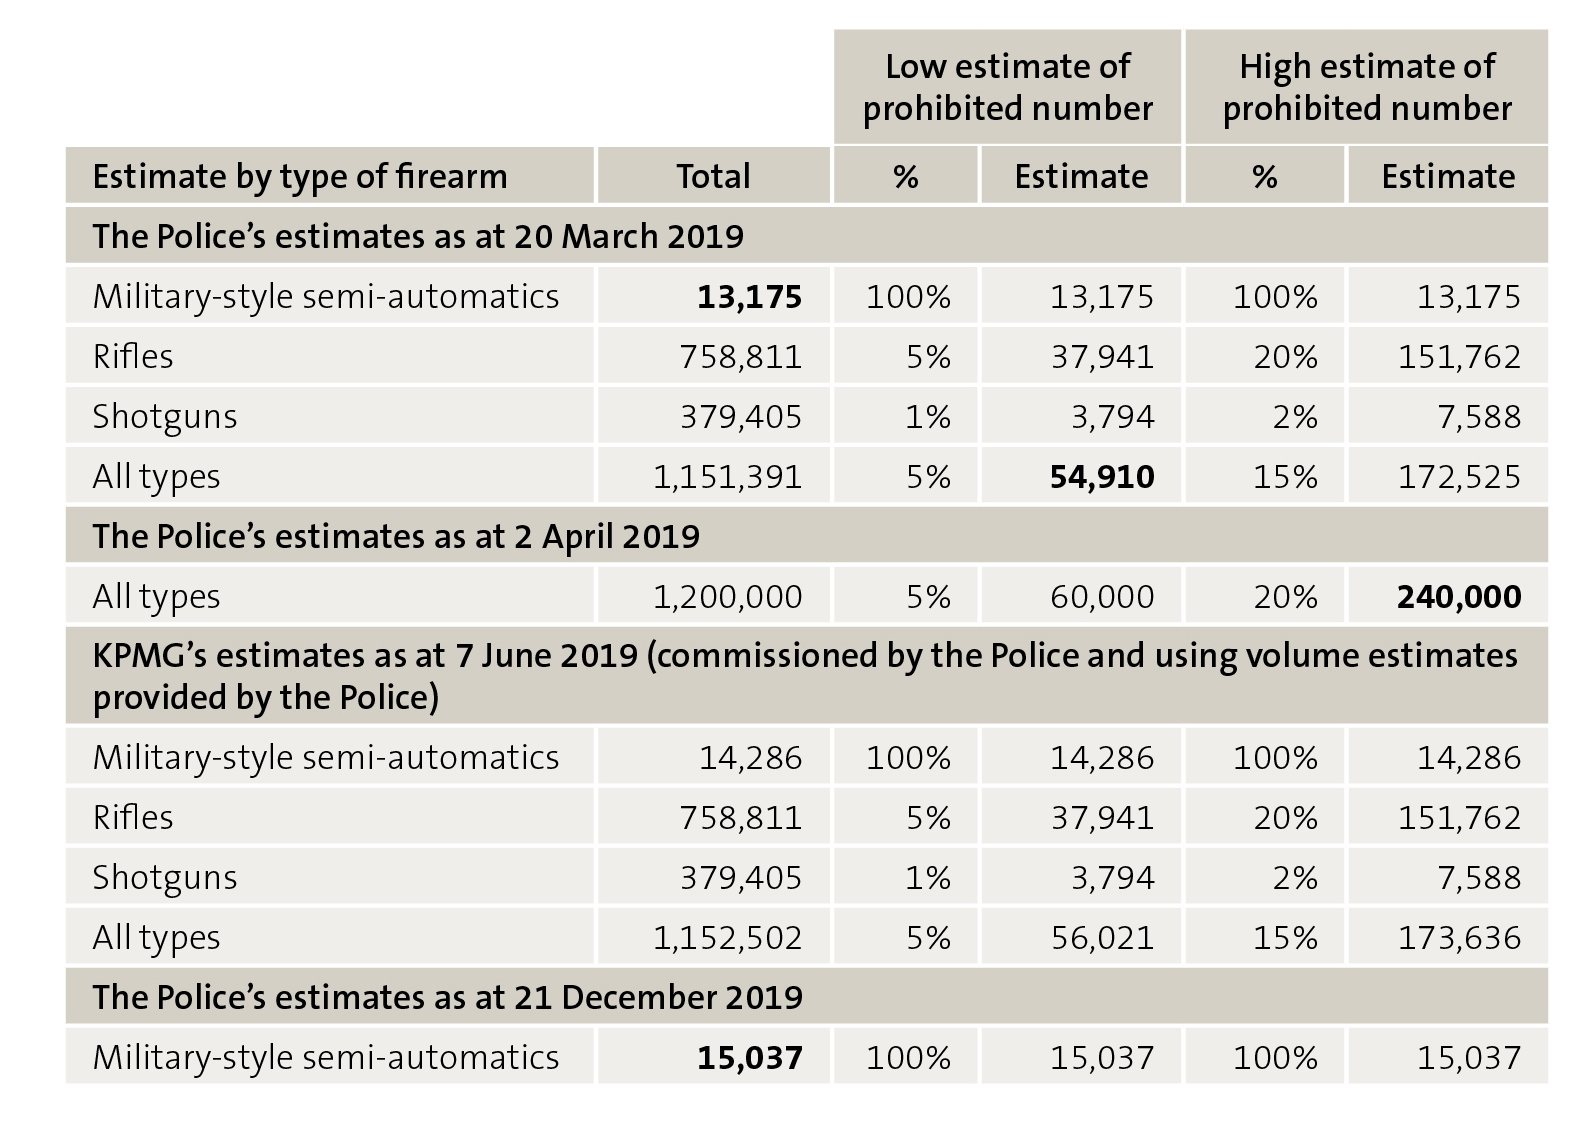 Figure 4 - The Police's estimates of the number of newly prohibited firearms in New Zealand